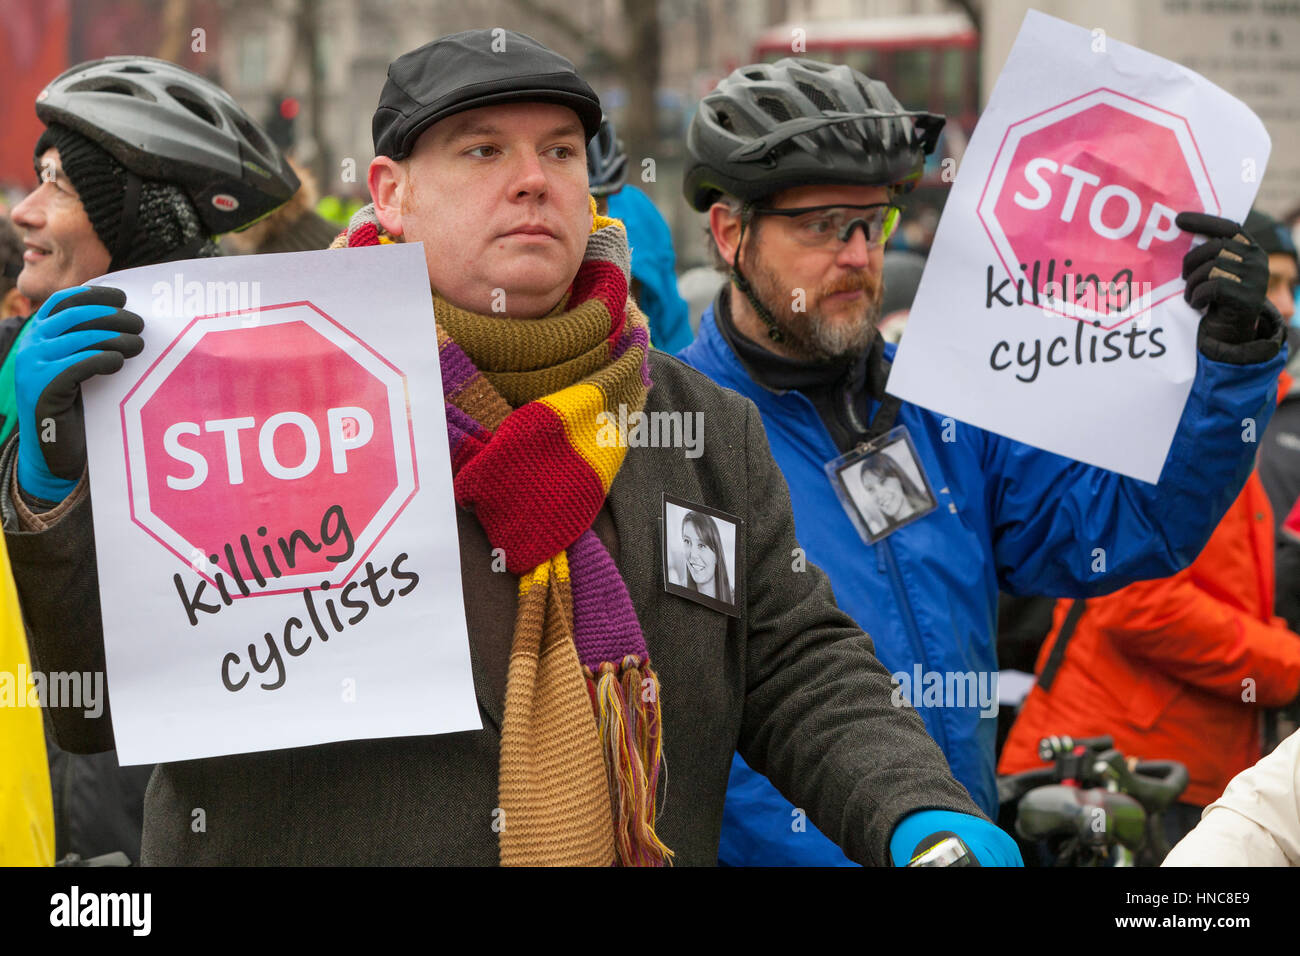 London, UK. 11th February 2017.  As air pollution kills thousands every year, hundreds of cyclists set out from Trafalgar Square to stage a 'Dye-In' protest outside The Treasury demanding that the Chancellor increase funding for cycling, rising to 10% of the UK transport budget by 2020. Credit: Steve Parkins/Alamy Live News Stock Photo